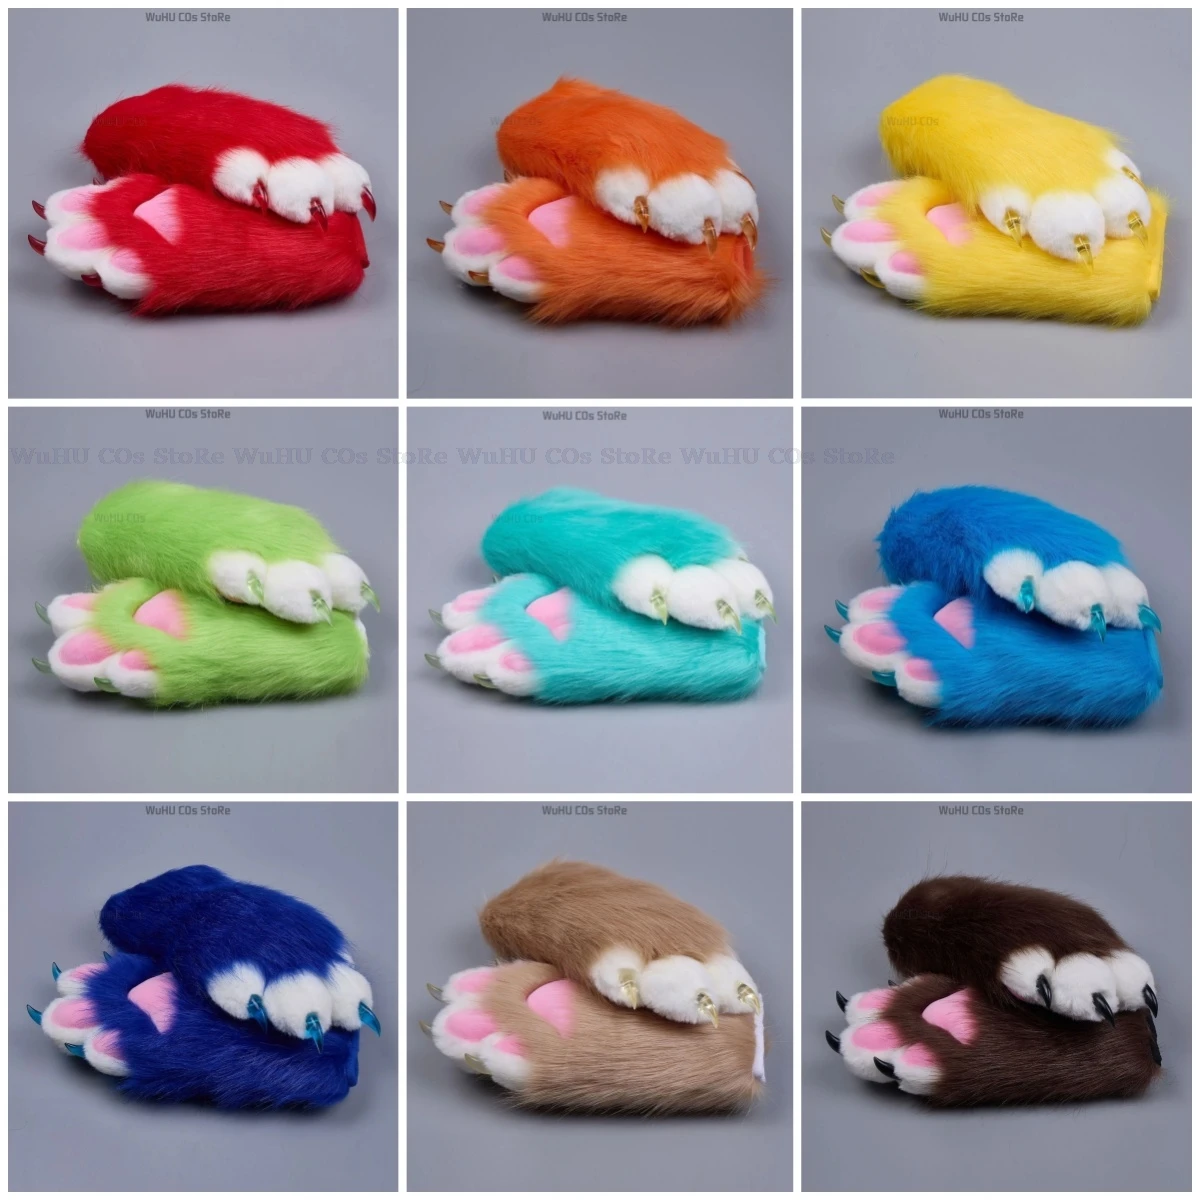 Fursuit Cosplay Paws Gloves Cosplay Accessories Furry Cosplay Paws Rubbit Cat Soft Cute Fluffy Animal Party Kawaii 22 COLORS